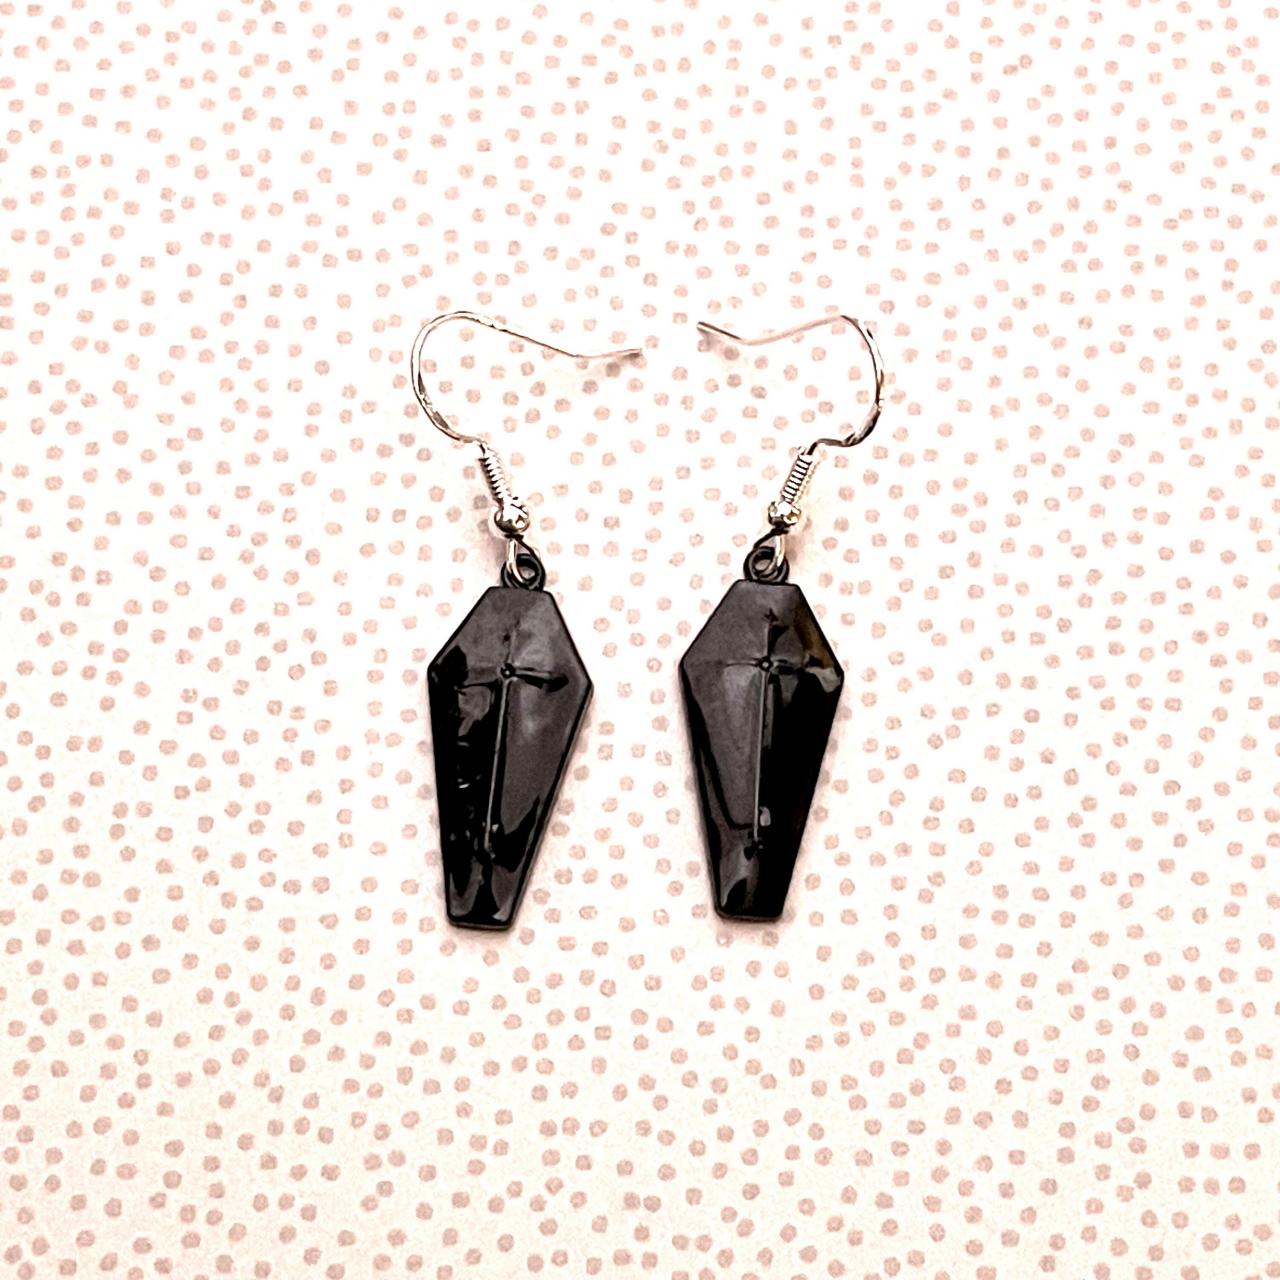 Black coffin earrings, Vampire accessories, gothic jewelry, goth black earrings, sterling silver, coffin jewelry